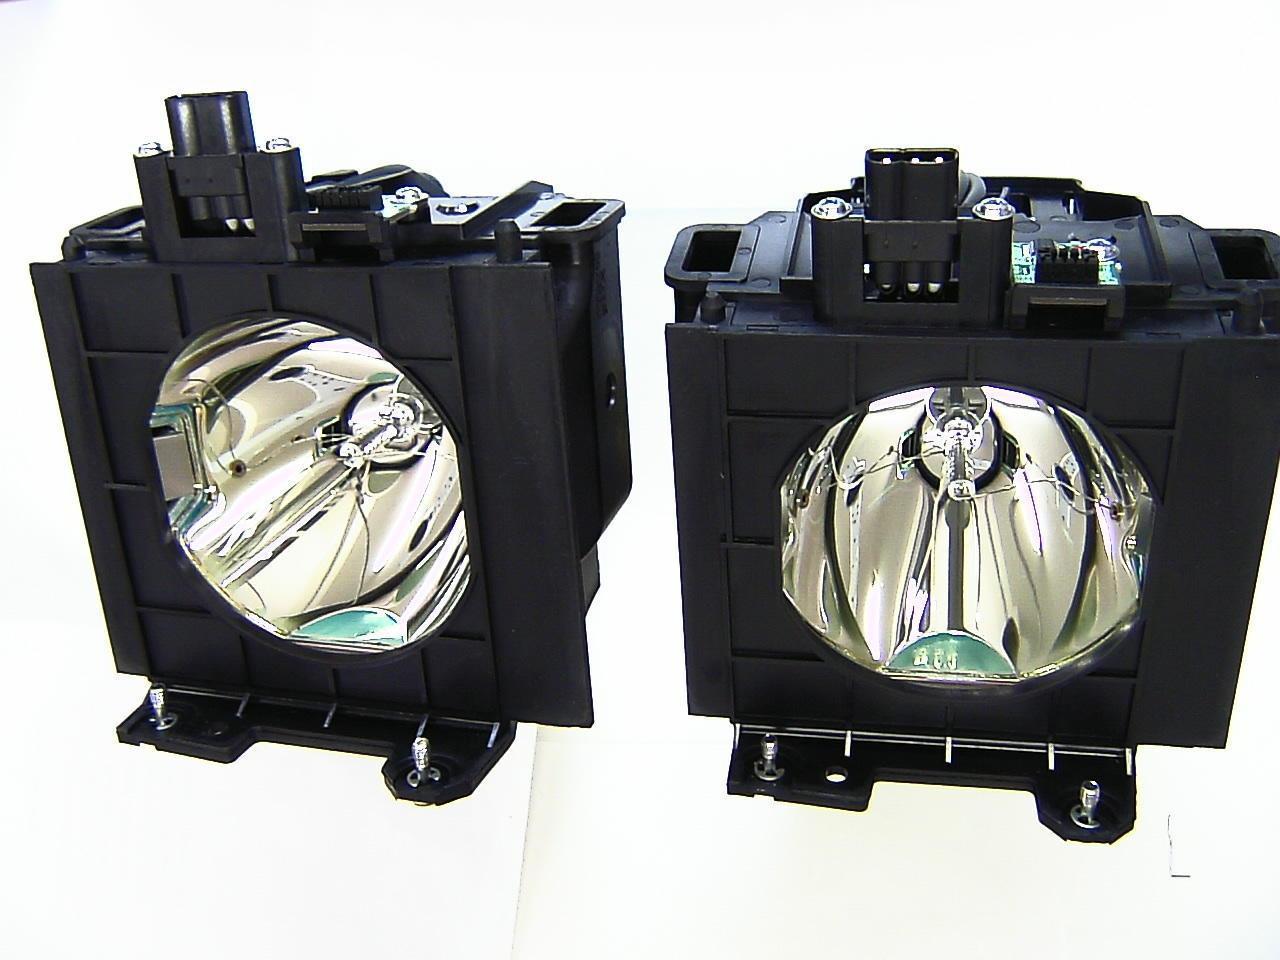 PTDW5100 Panasonic Twin-Pack Projector Lamp Replacement (contains two lamps). Projector Lamp Assembly with High Quality OEM Com